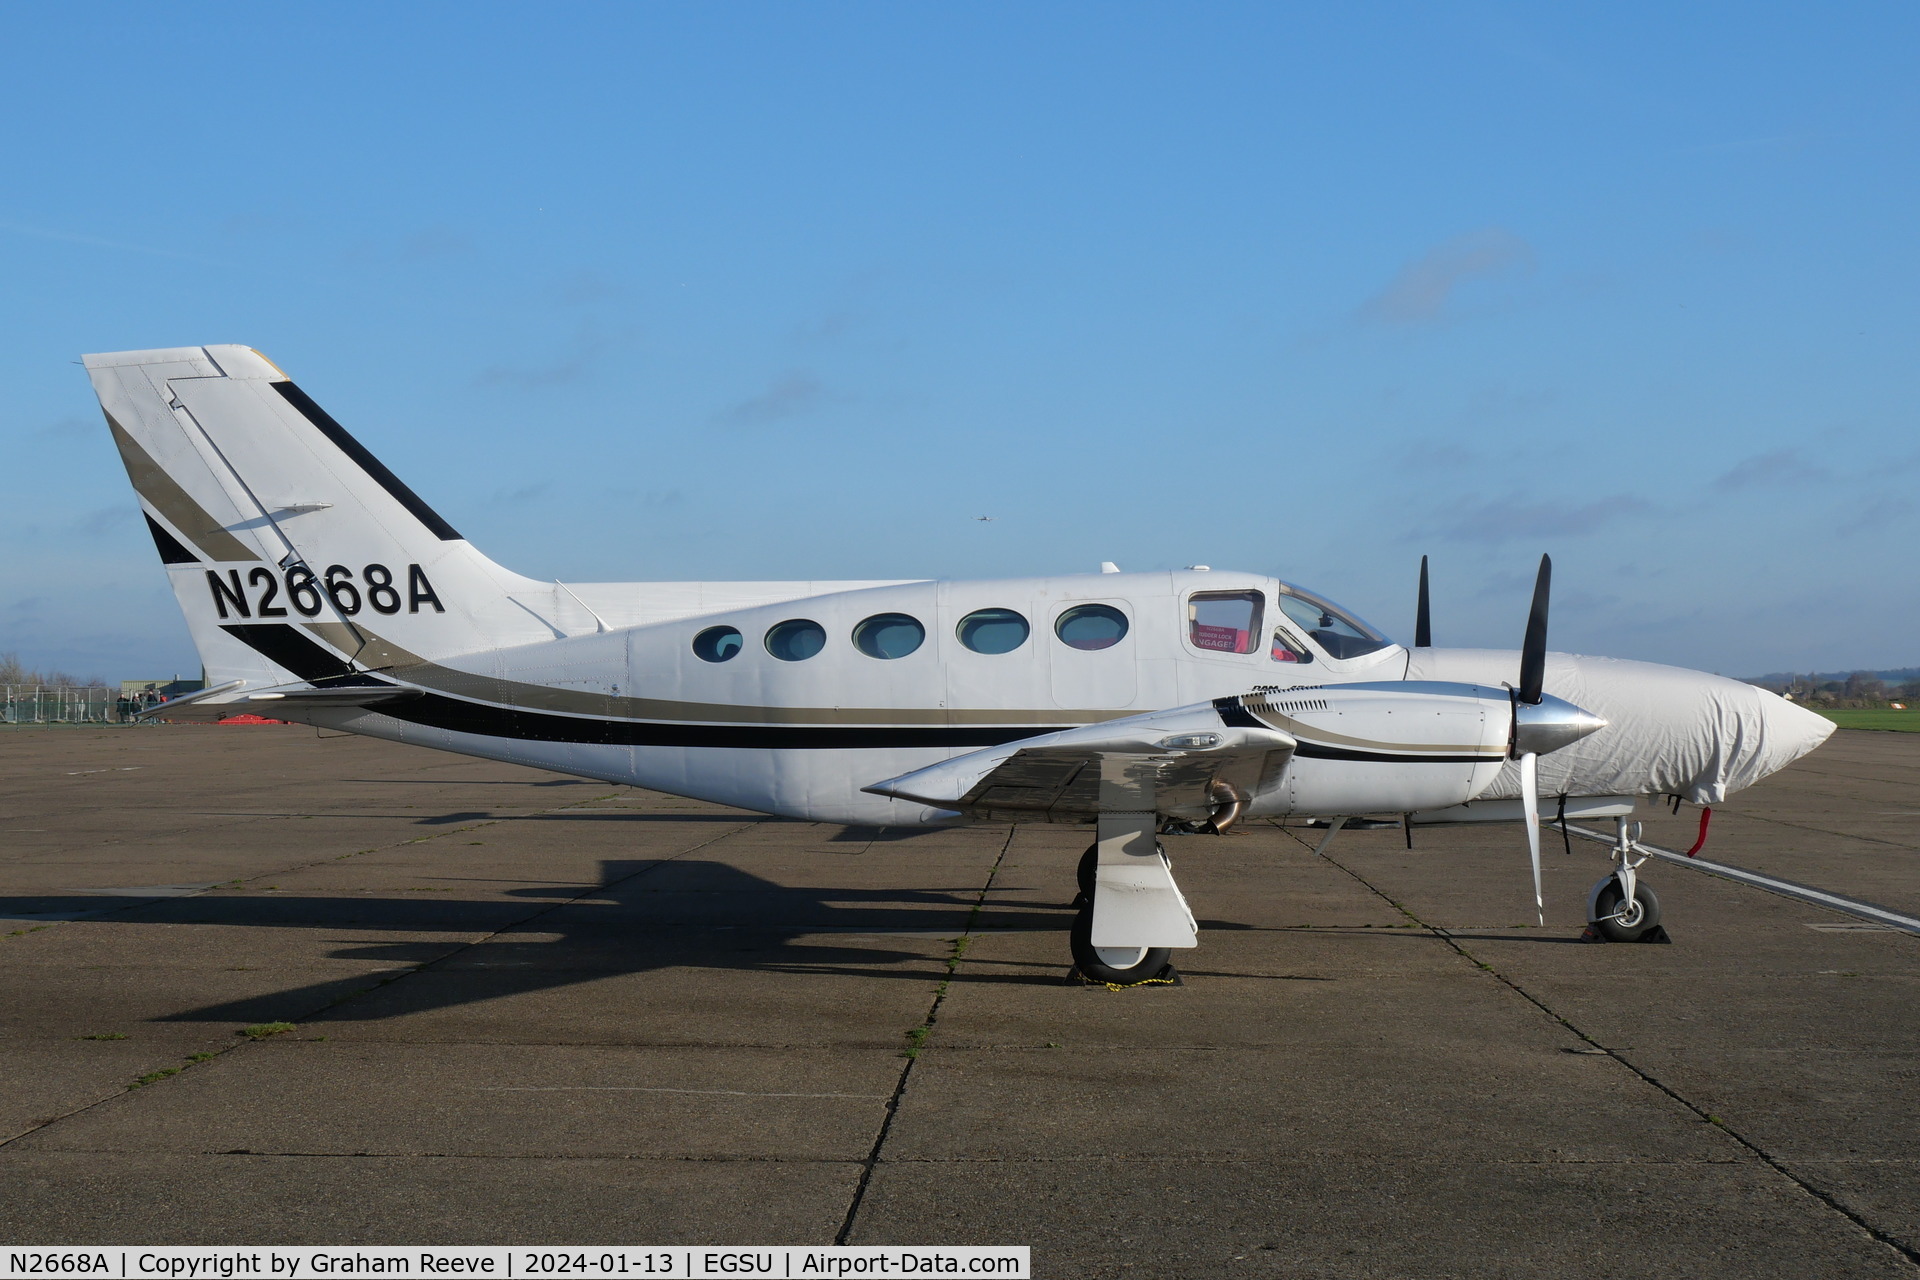 N2668A, 1981 Cessna 421C Golden Eagle C/N 421C1216, Parked at Duxford.